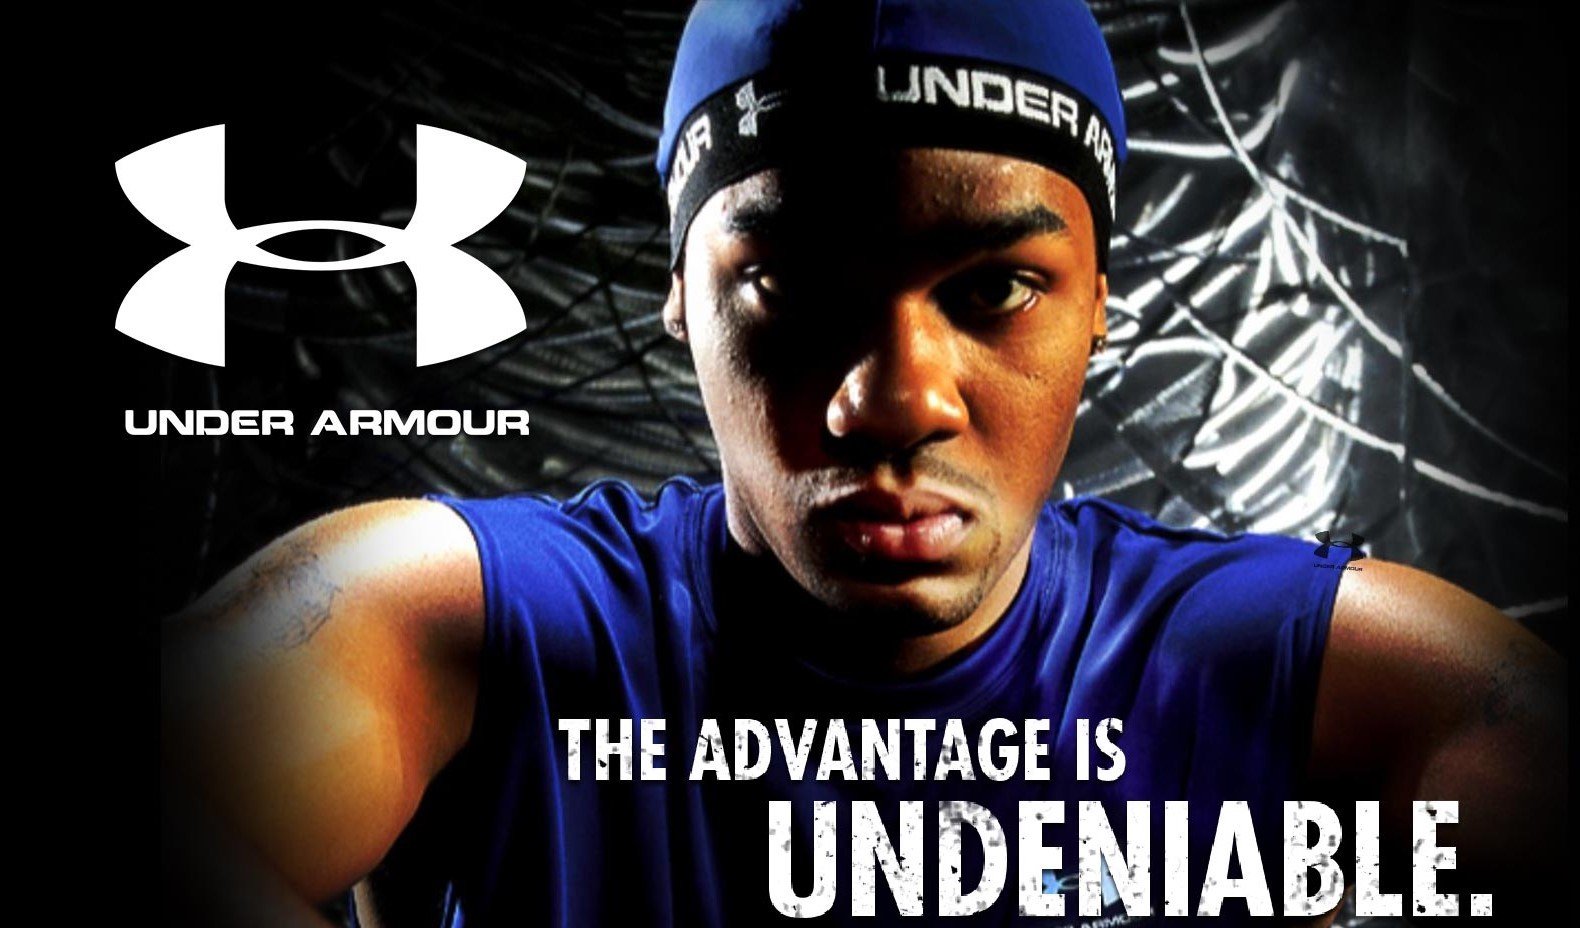 SWOT analysis of Under Armour